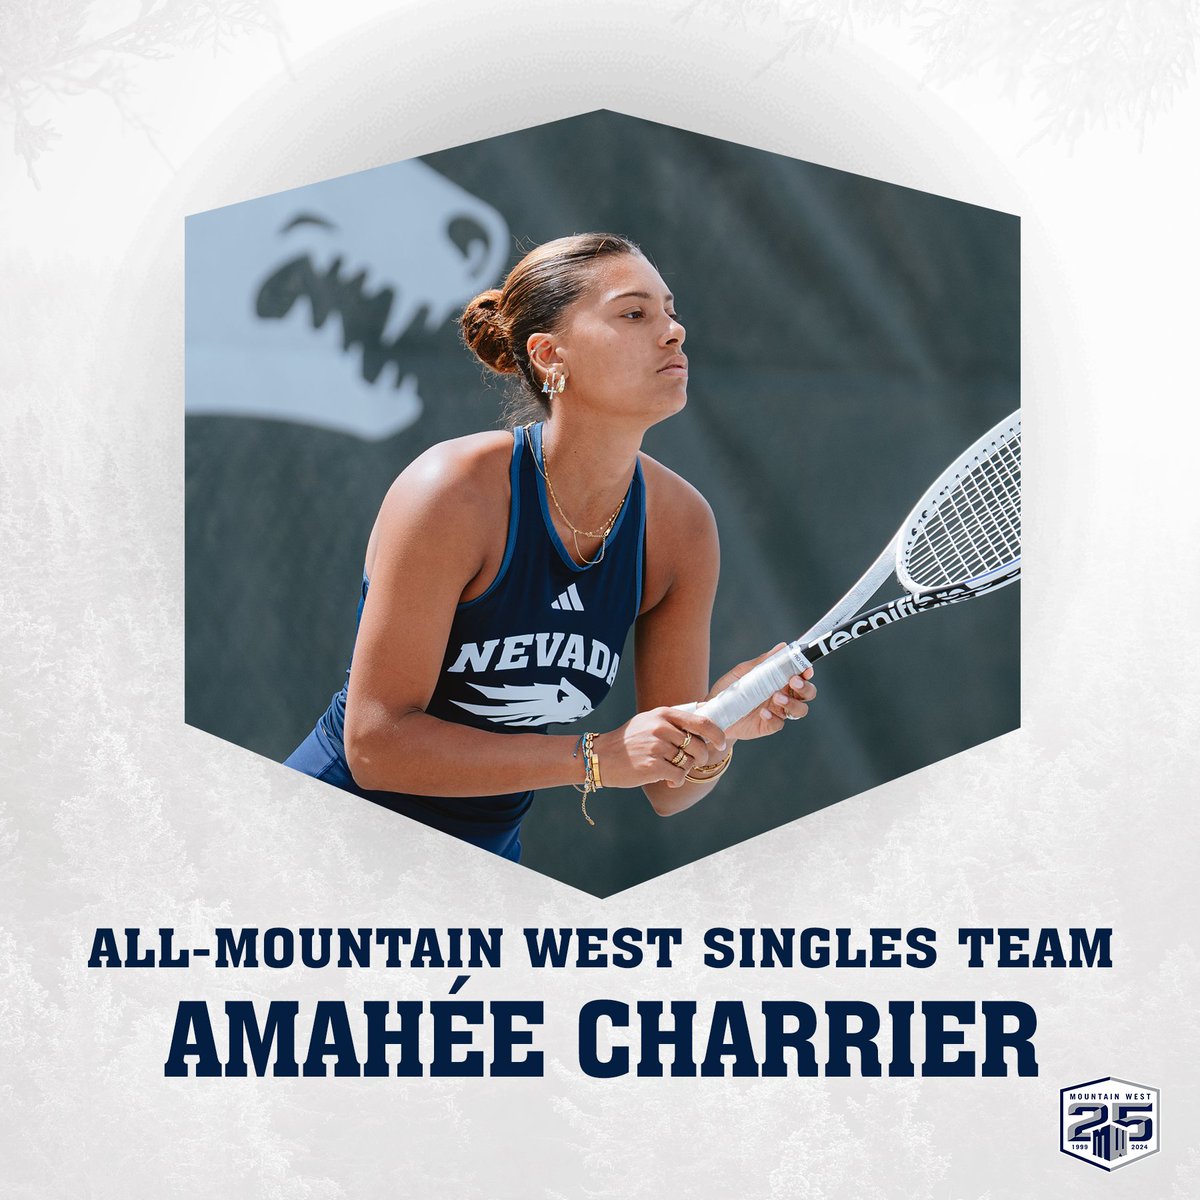 She's 2⃣ for 2⃣!!! Amahée has been named to her second career All-Mountain West Singles Team! #BattleBorn